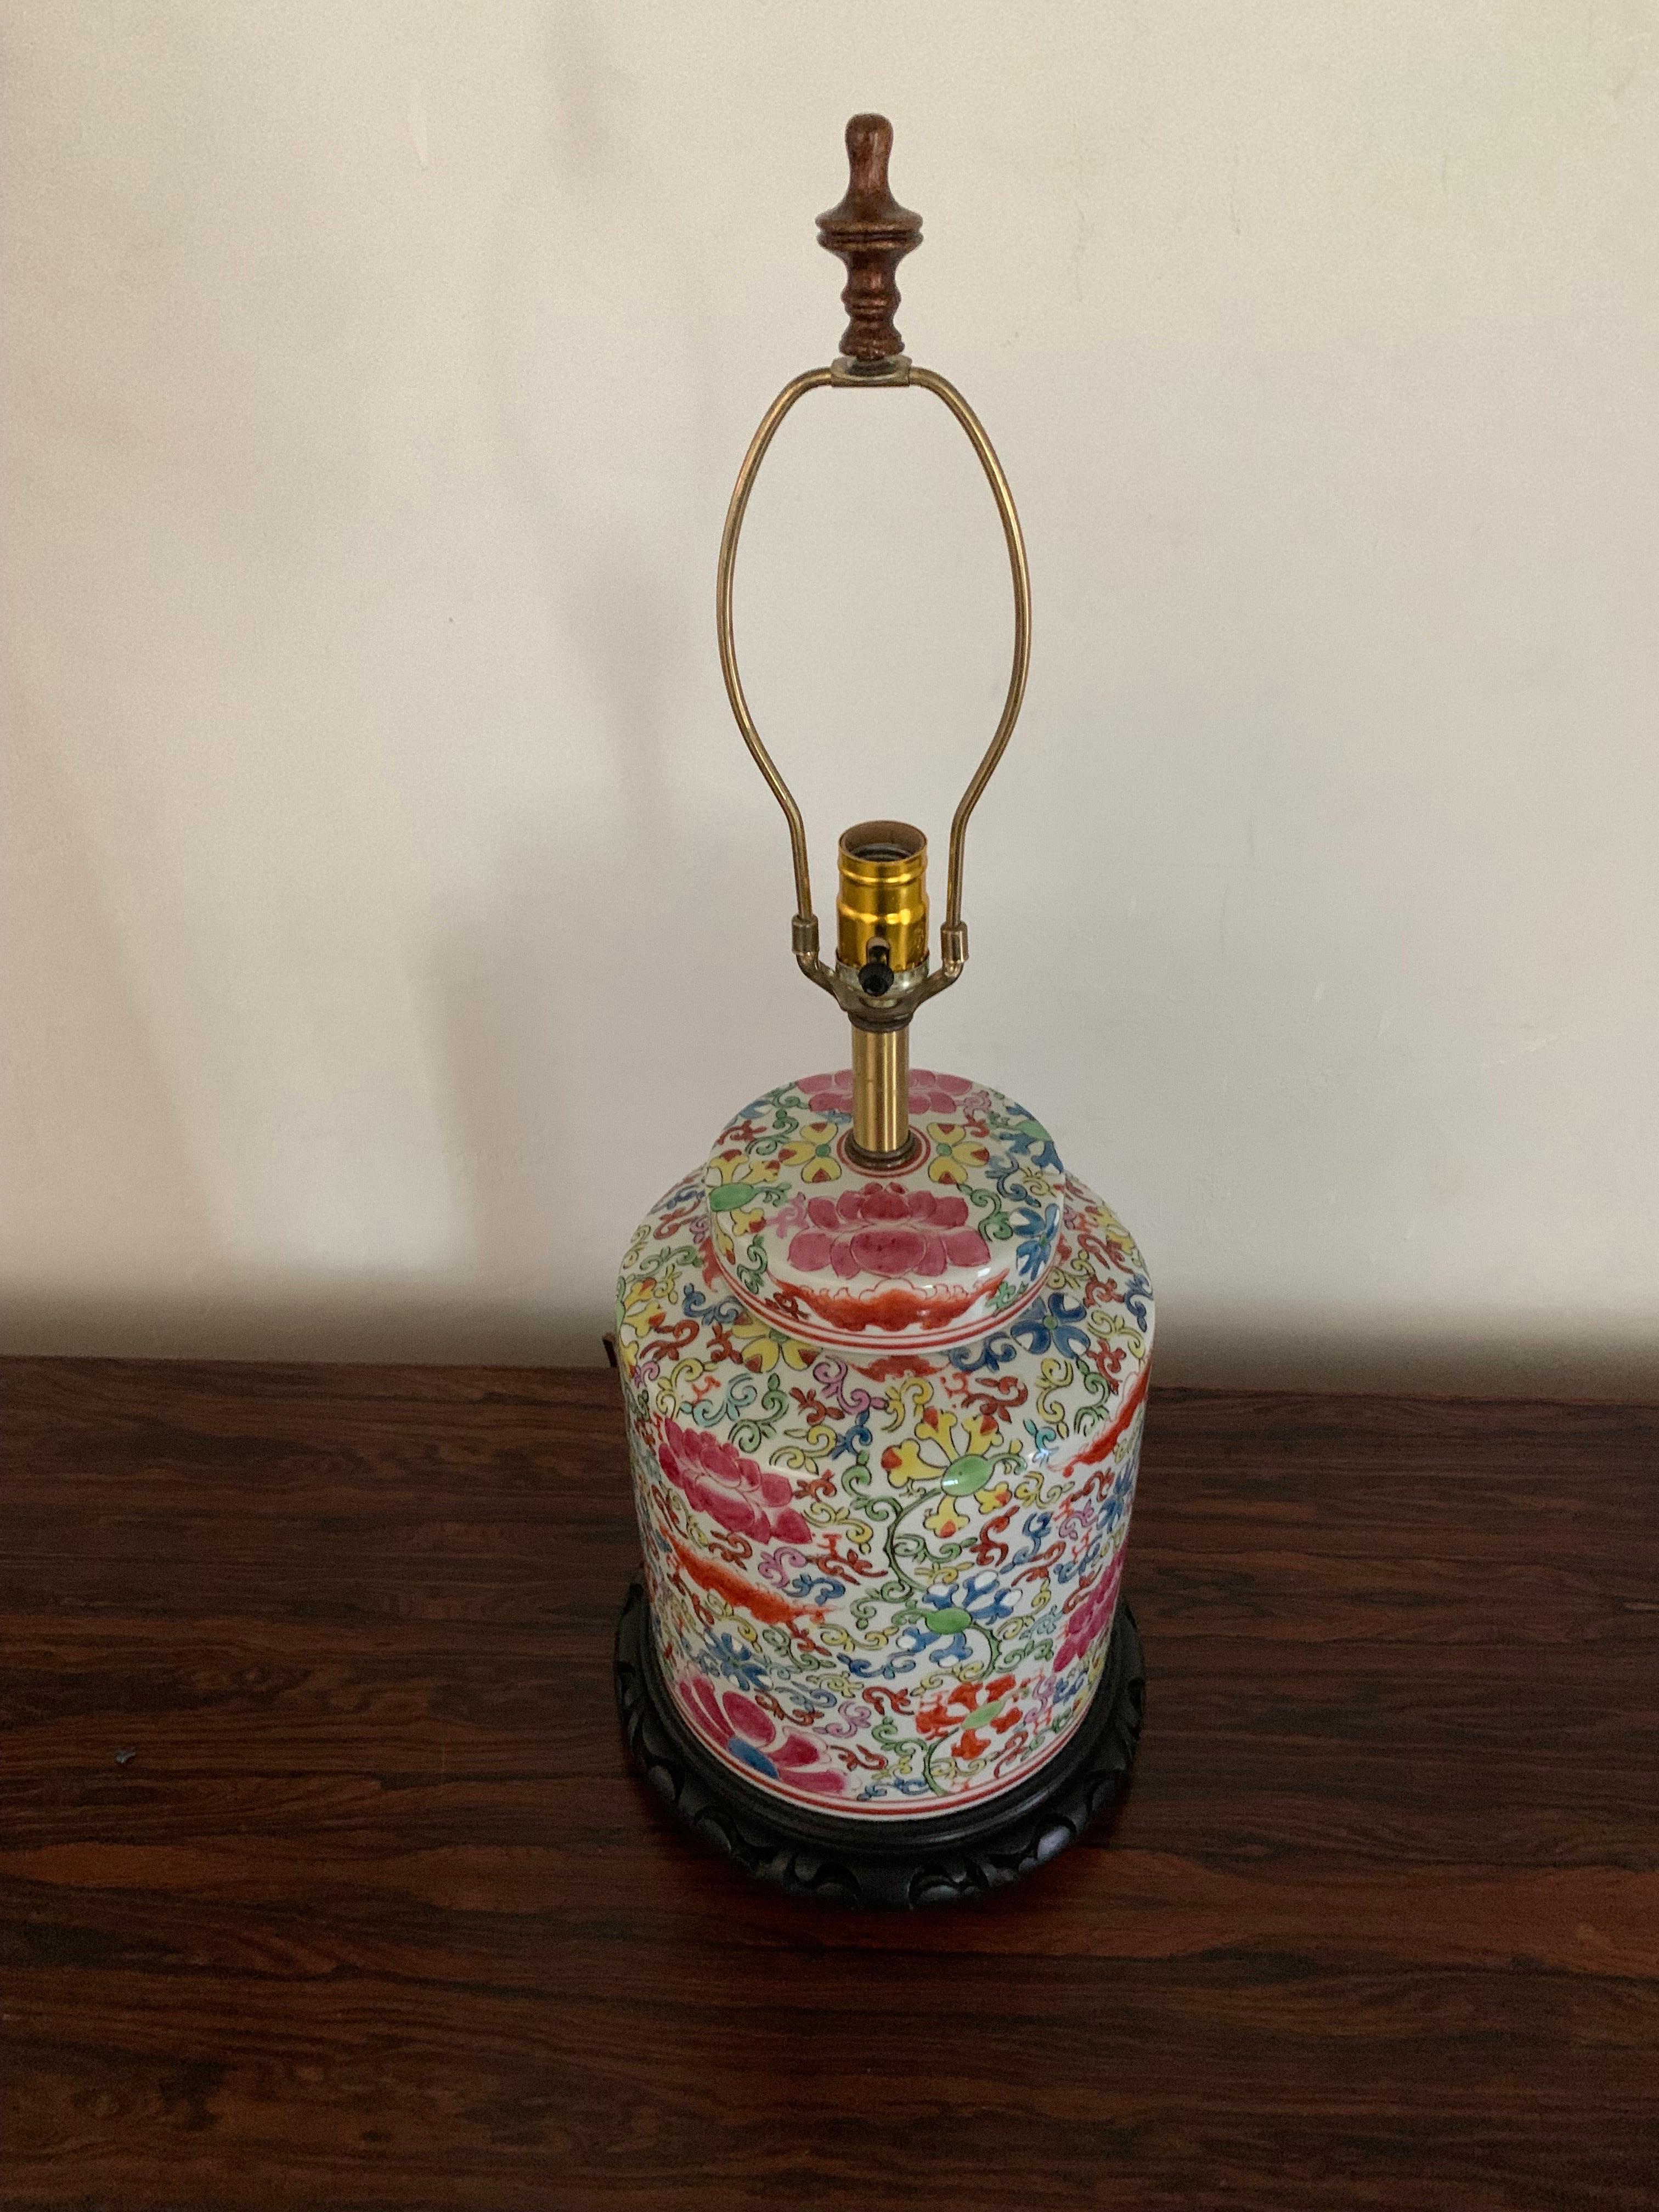 Beautiful and colorful vintage Chinese ginger jar that has been converted into a lap. The ginger jar is two pieces; vase and lid. Sits upon a dark wooded base. Ginger jar is masterfully hand painted in vibrant yellows, blues, and reds on a white